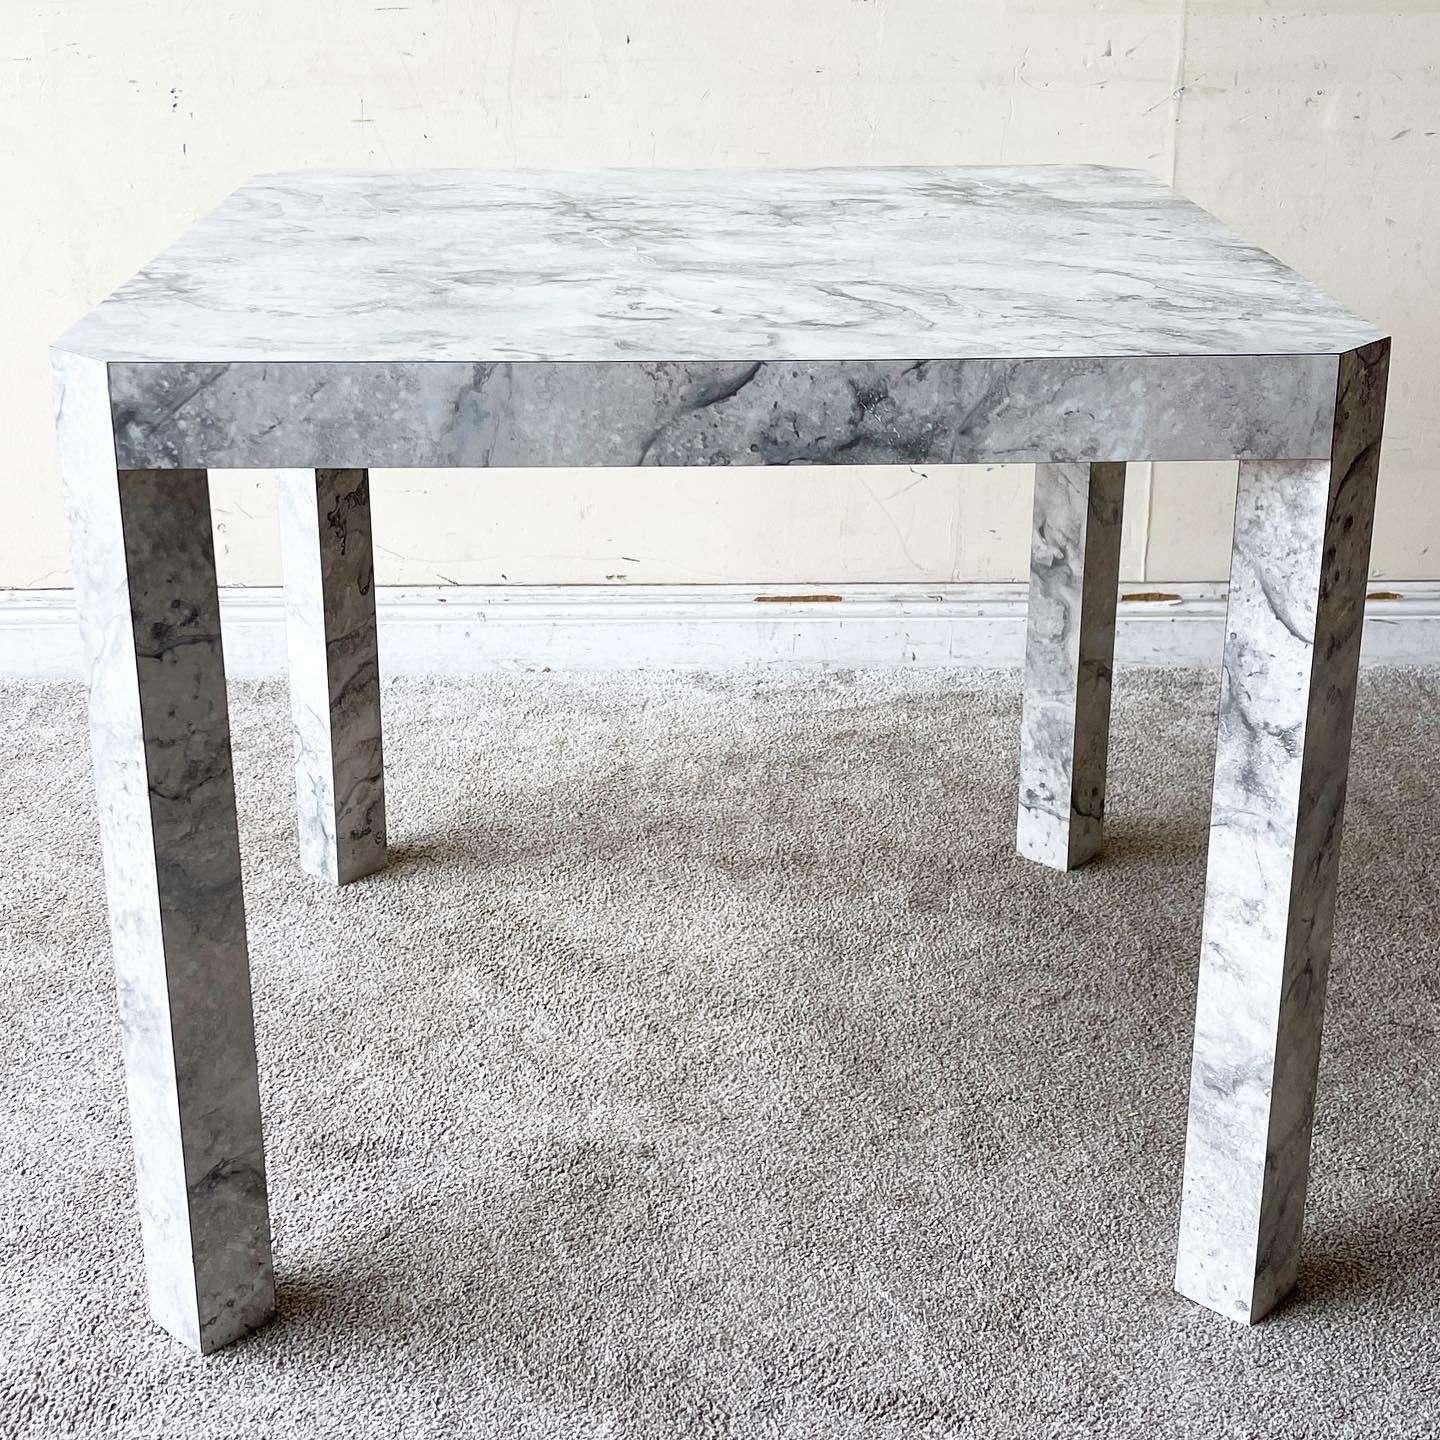 Incredible vintage postmodern square dining table. Features a white and gray faux marble gloss laminate with legs that are flush to each corner. 